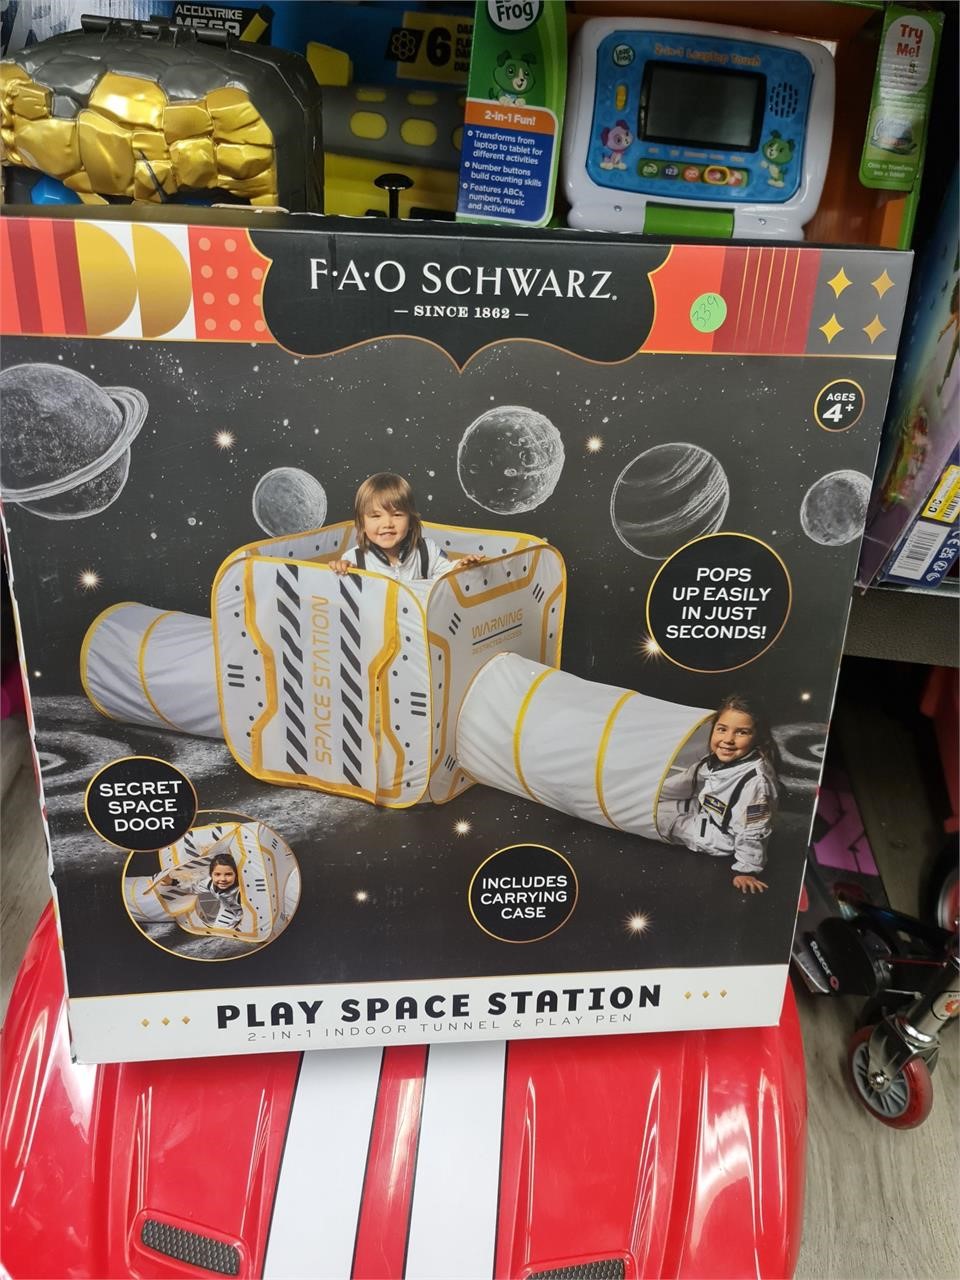 Play space station